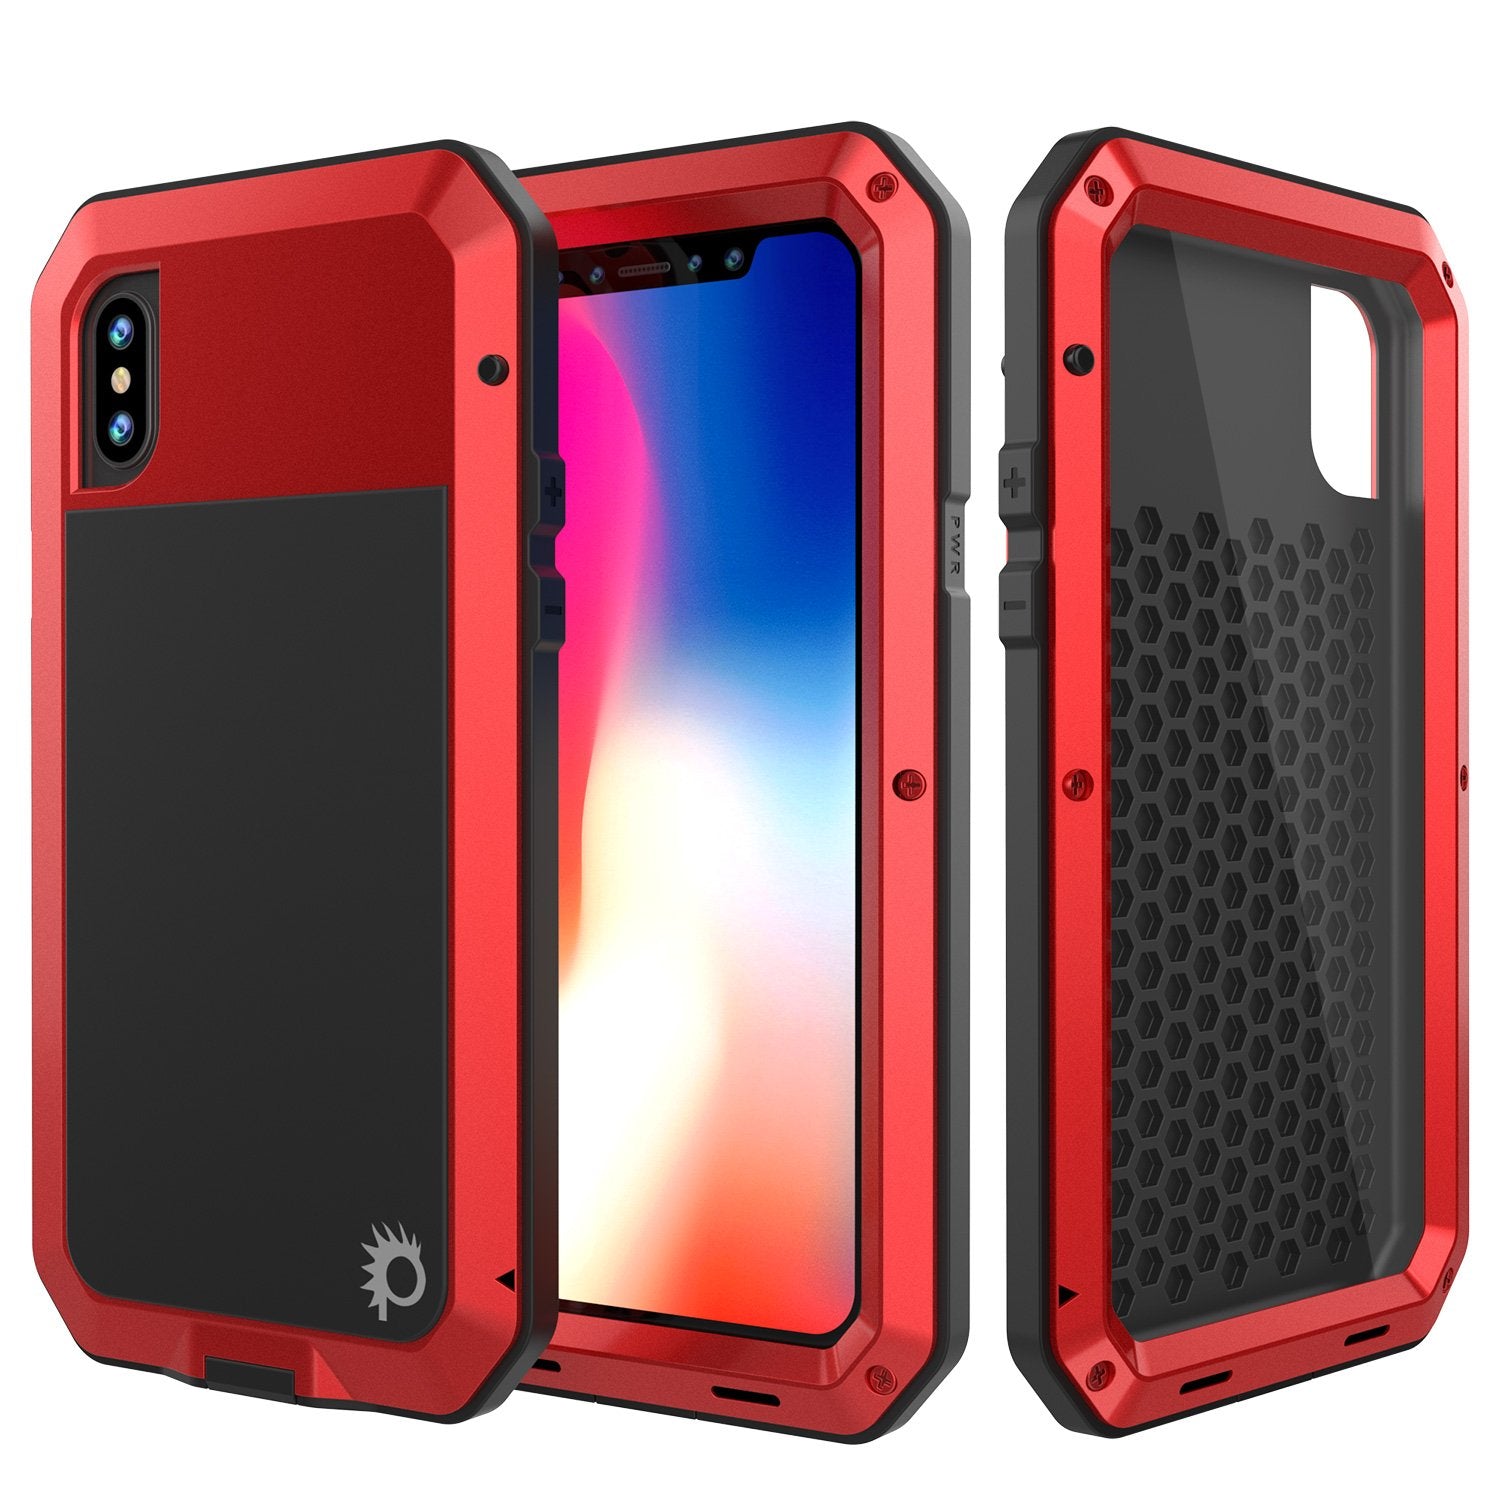 iPhone X Metal Case, Heavy Duty Military Grade Rugged Armor Case, Red